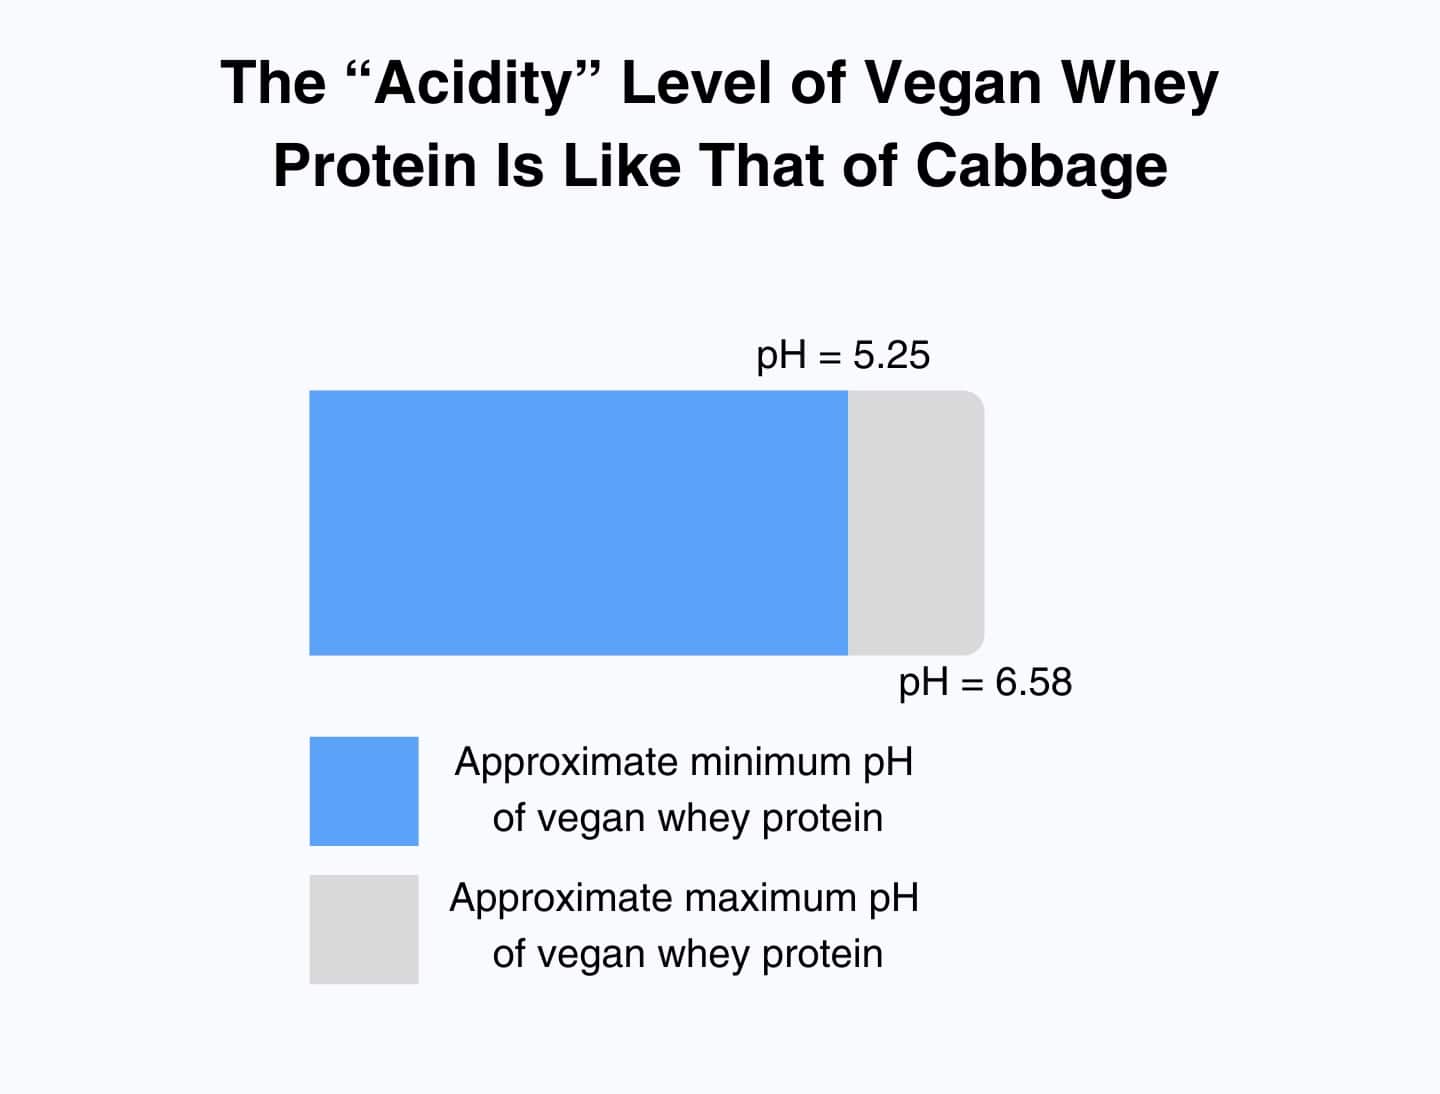 This image shows that vegan whey protein powder has a pH of about 5.25 - 6.58.